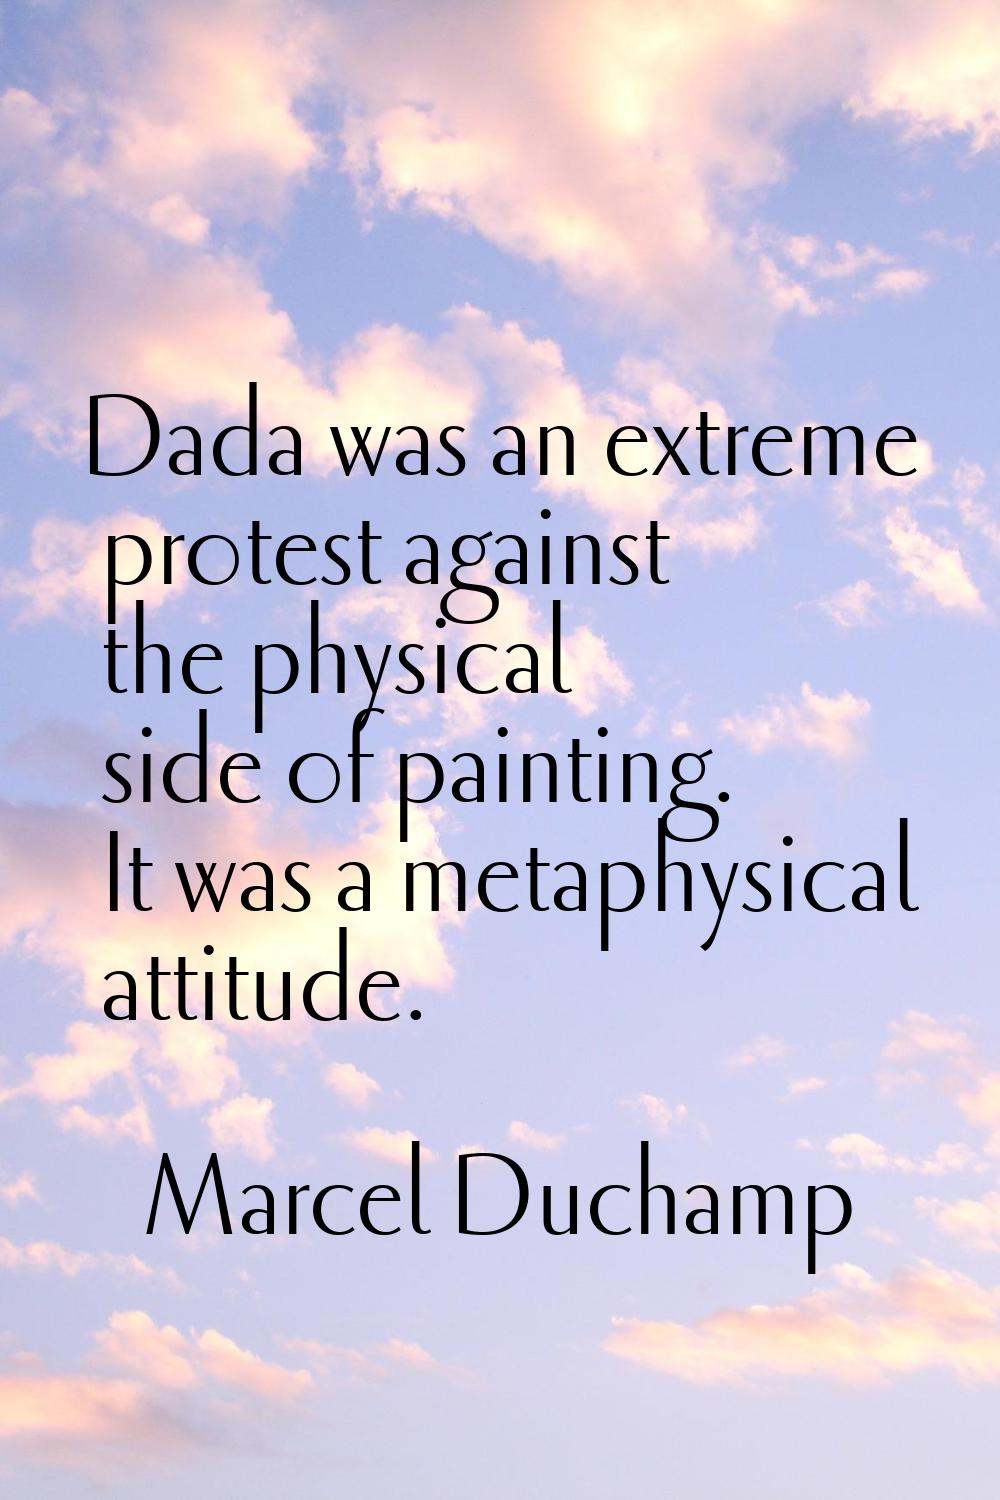 Dada was an extreme protest against the physical side of painting. It was a metaphysical attitude.